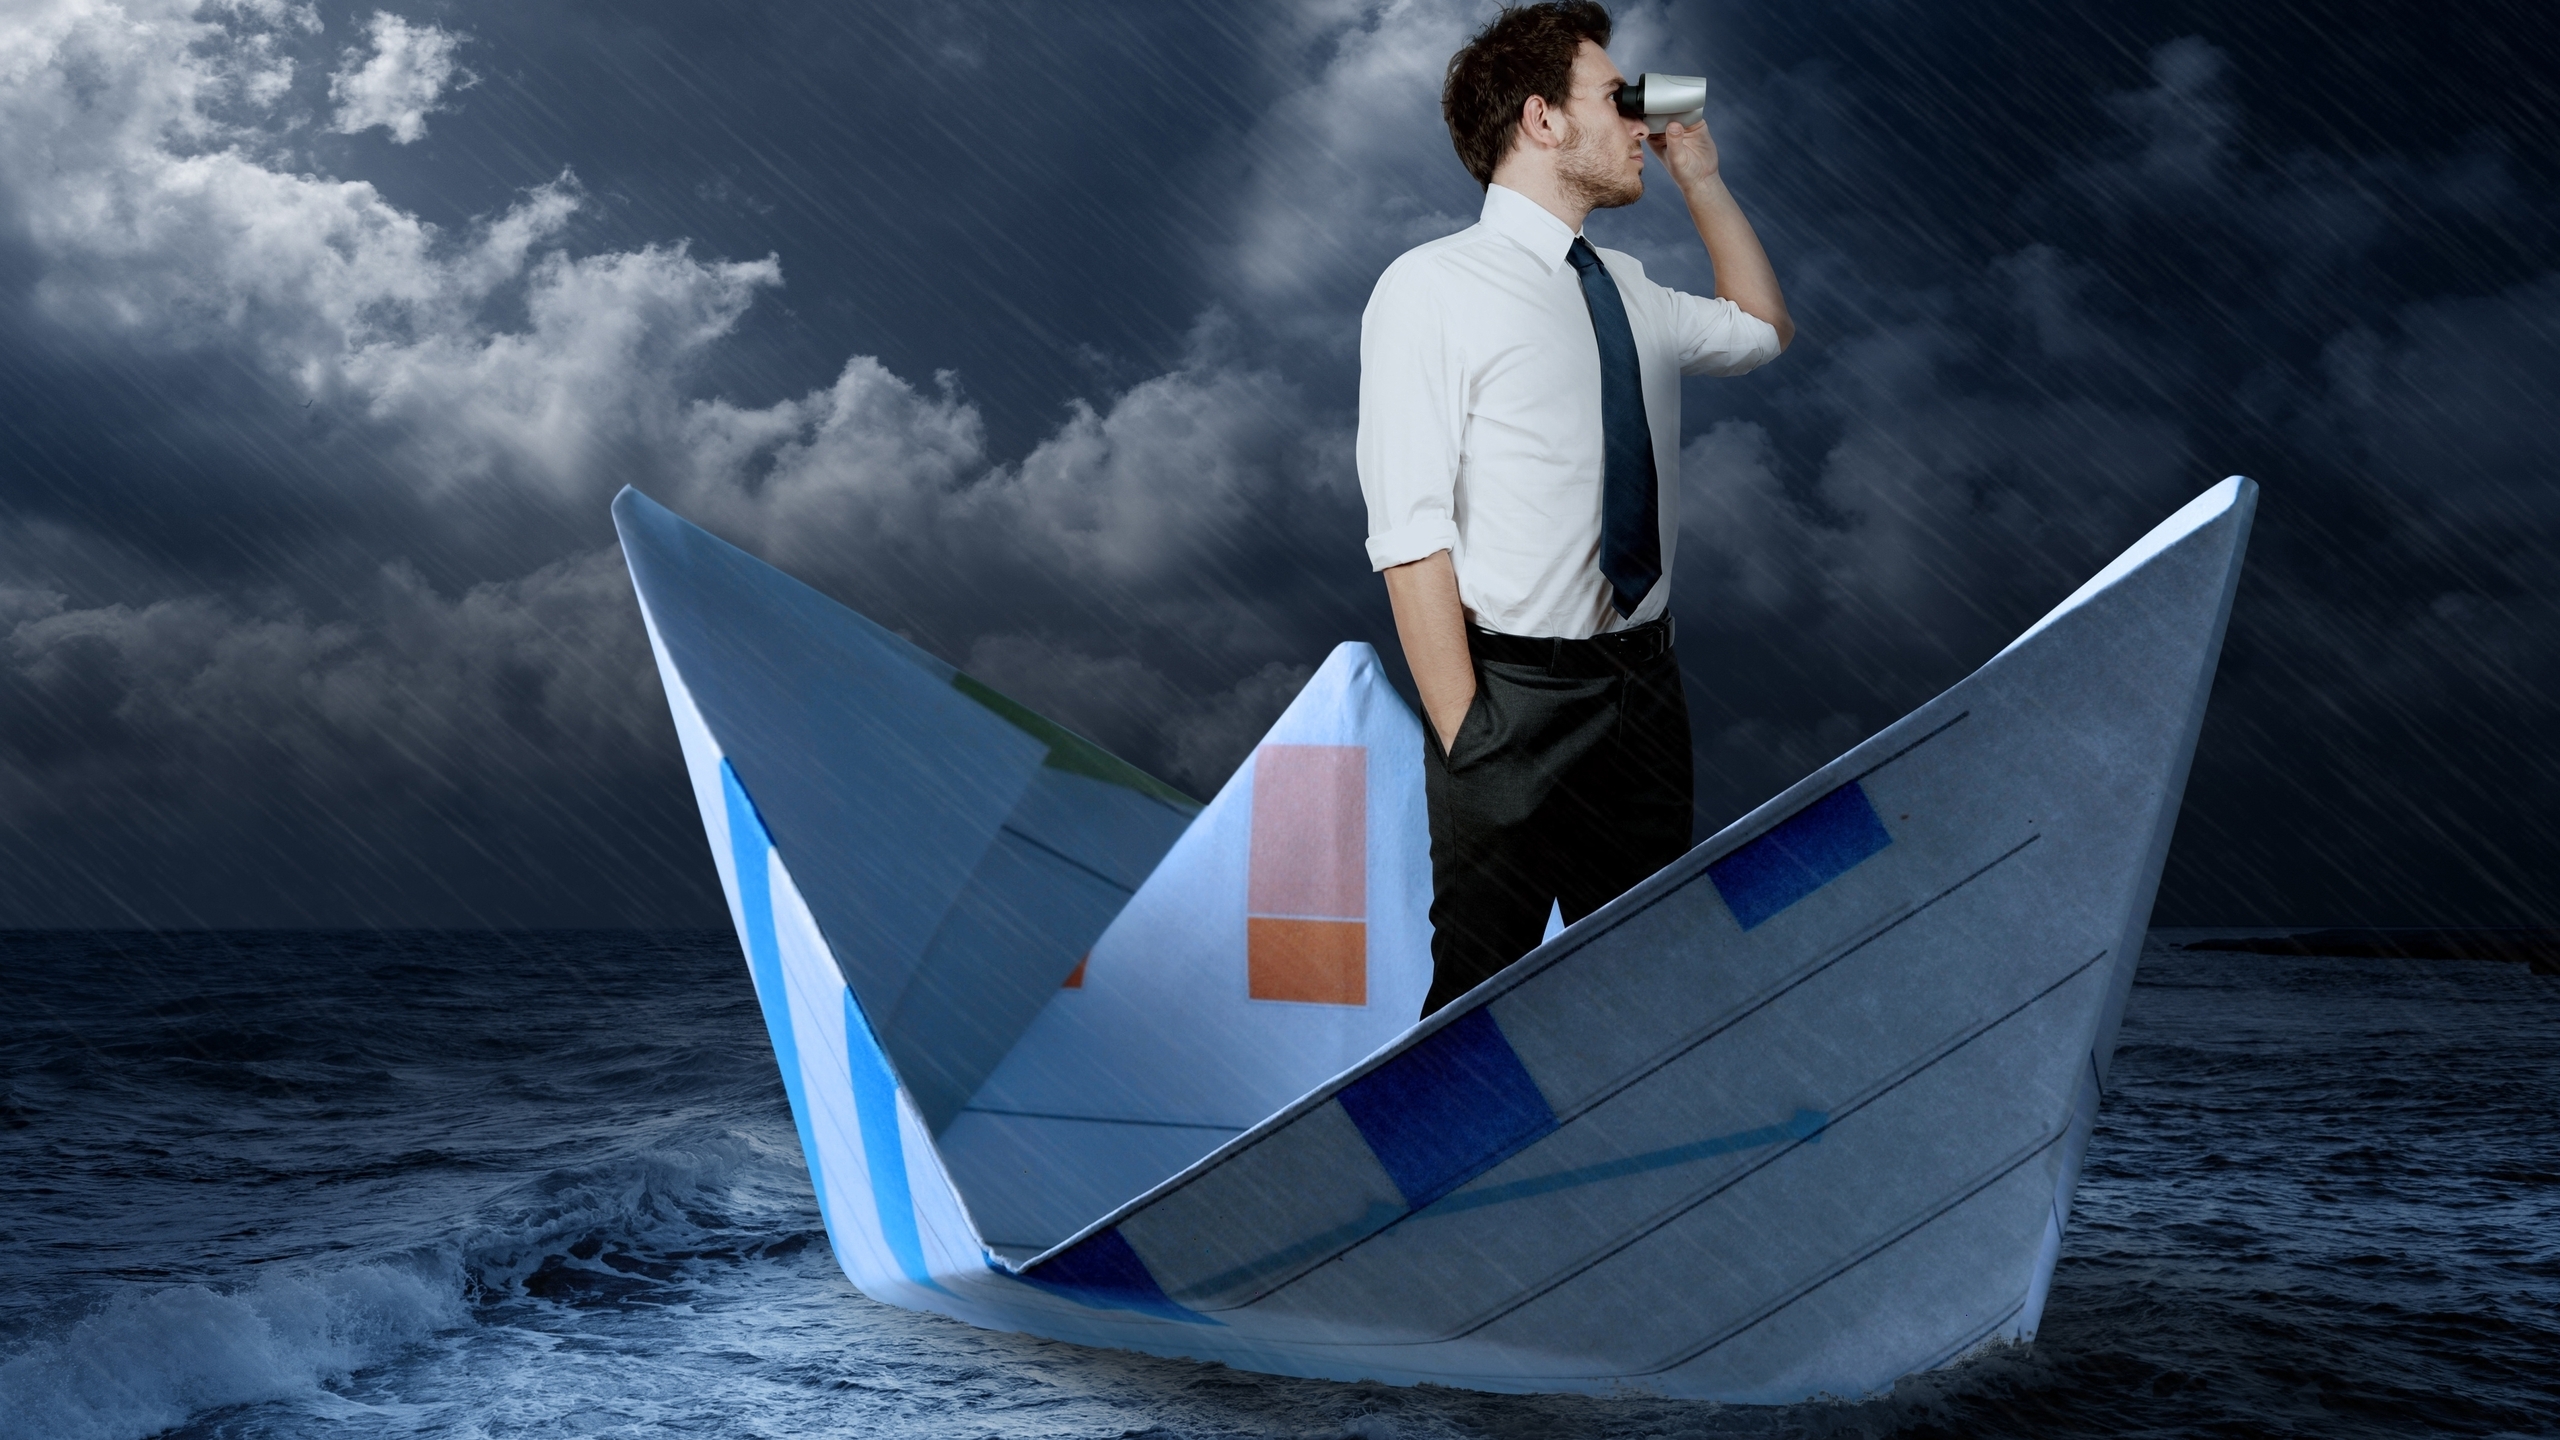 Man in Paper Boat for 2560x1440 HDTV resolution